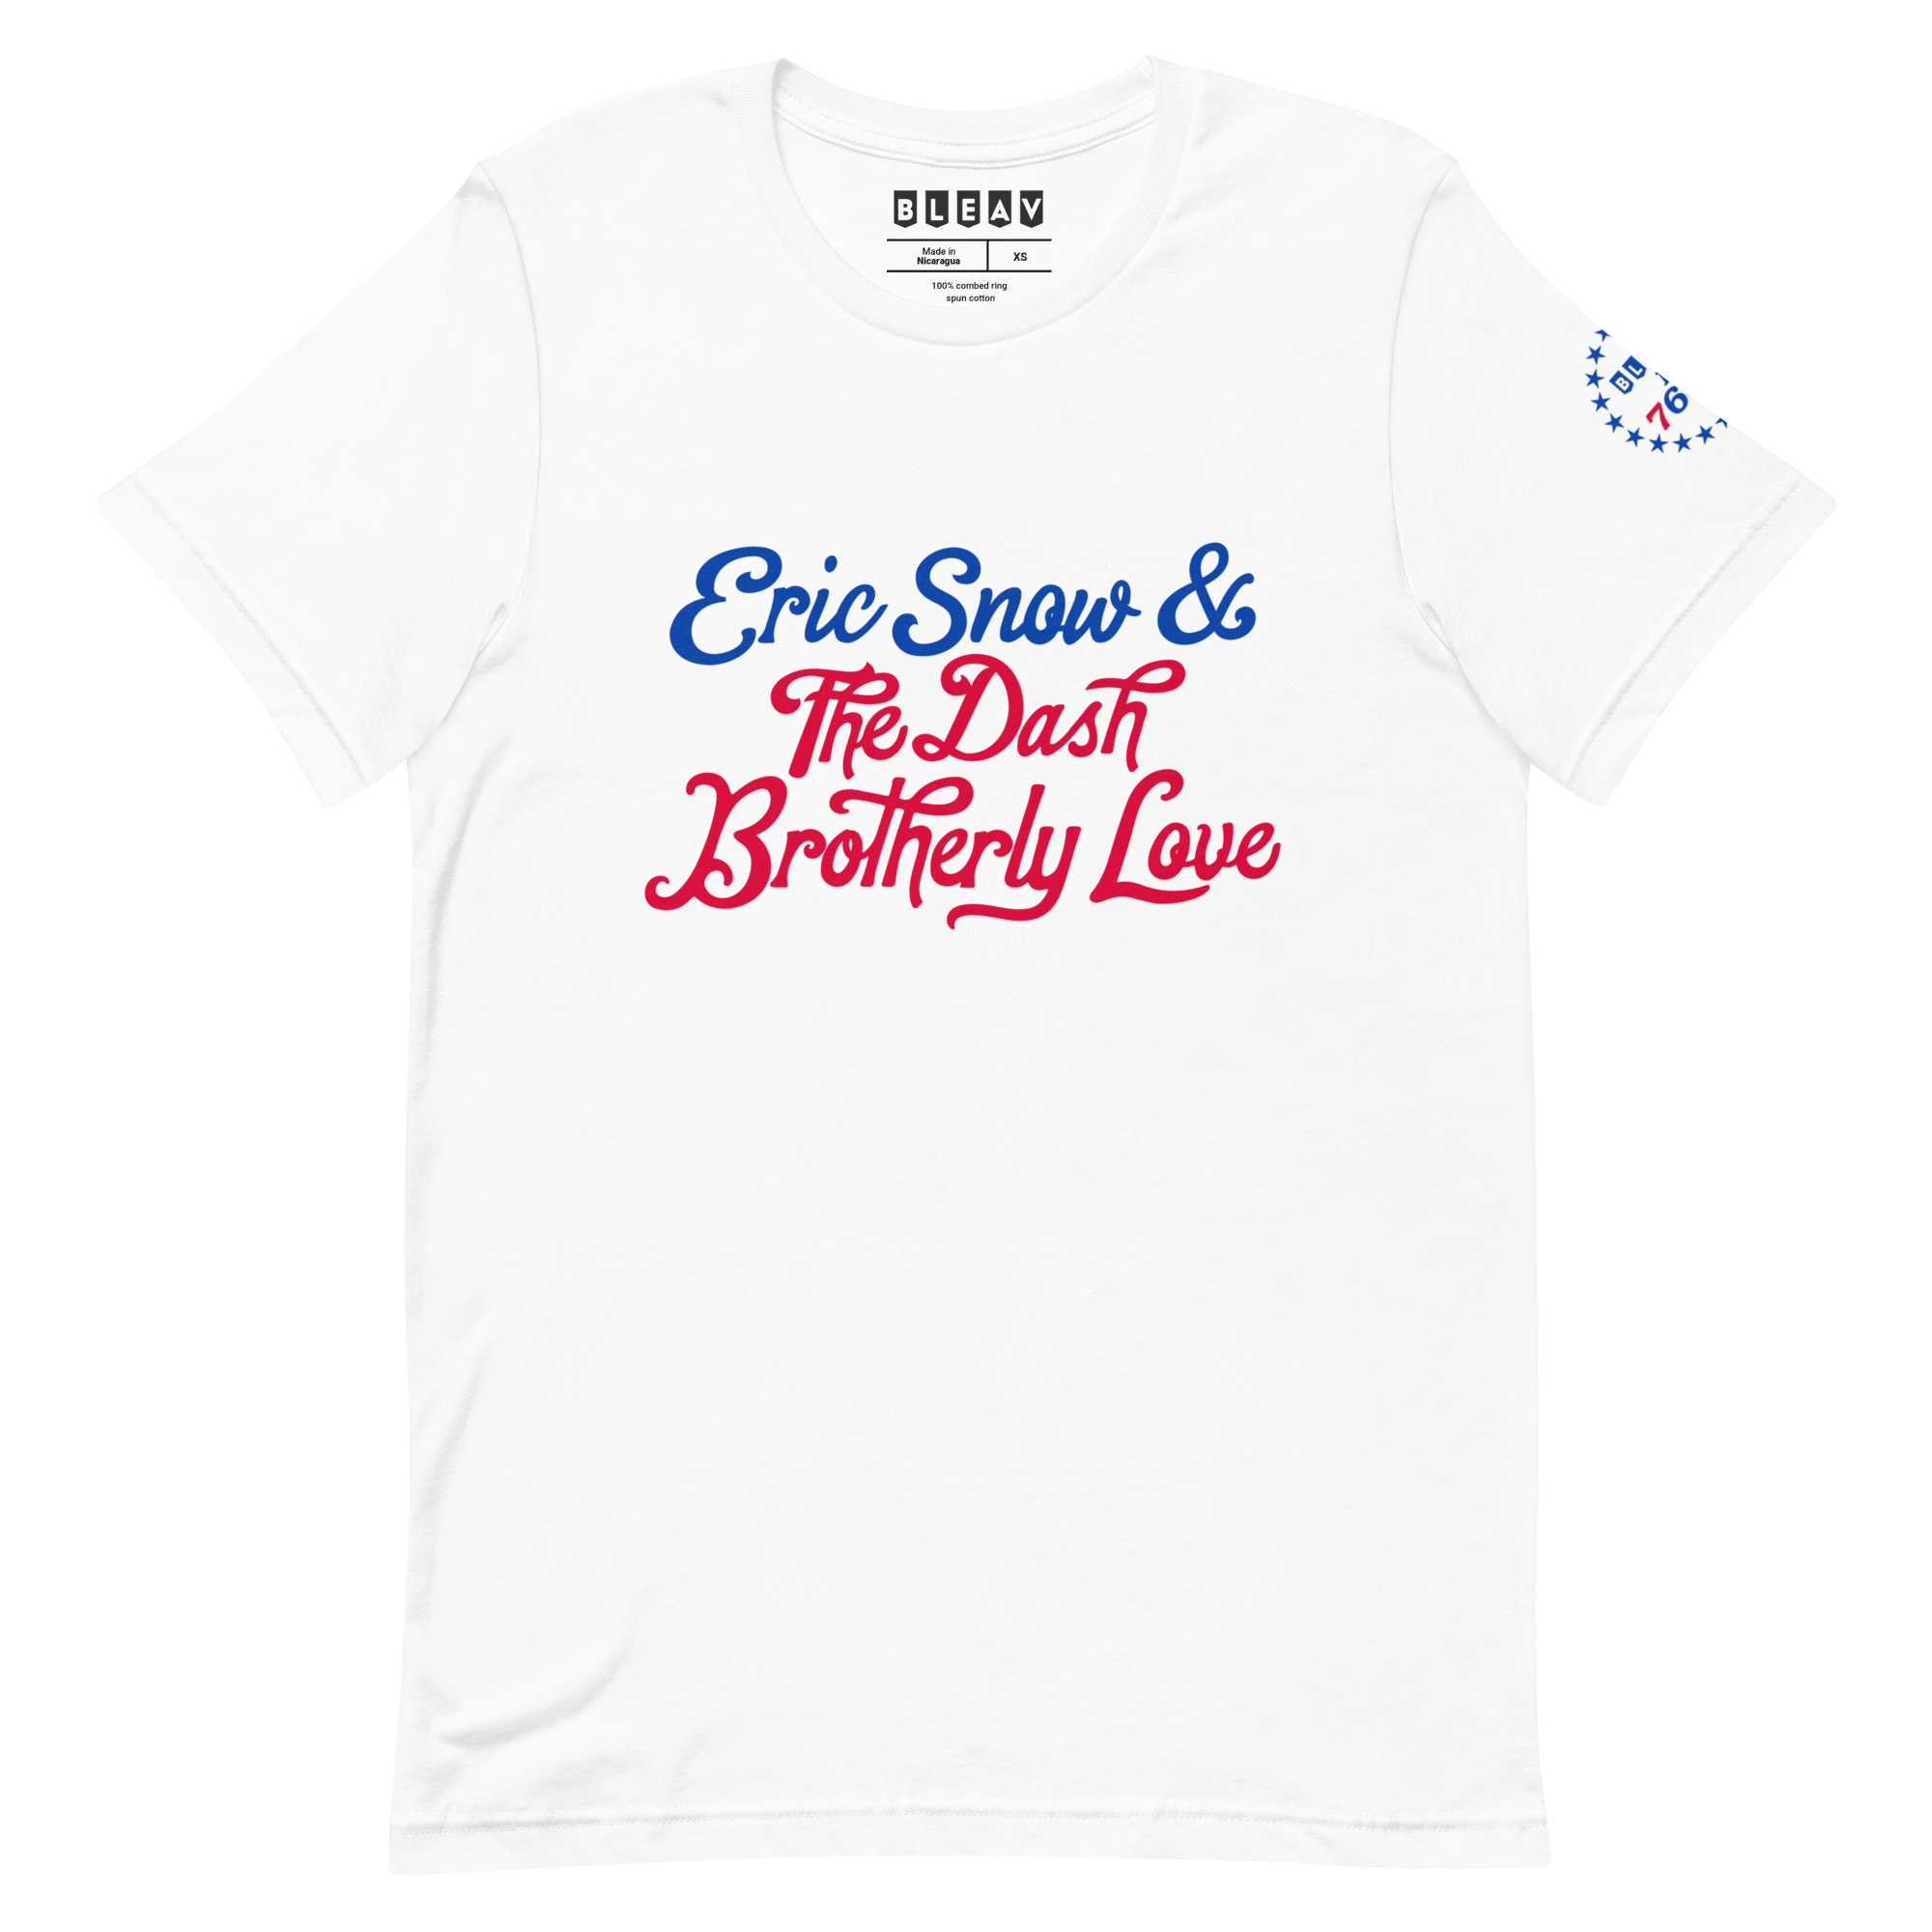 76ers brotherly love t shirt